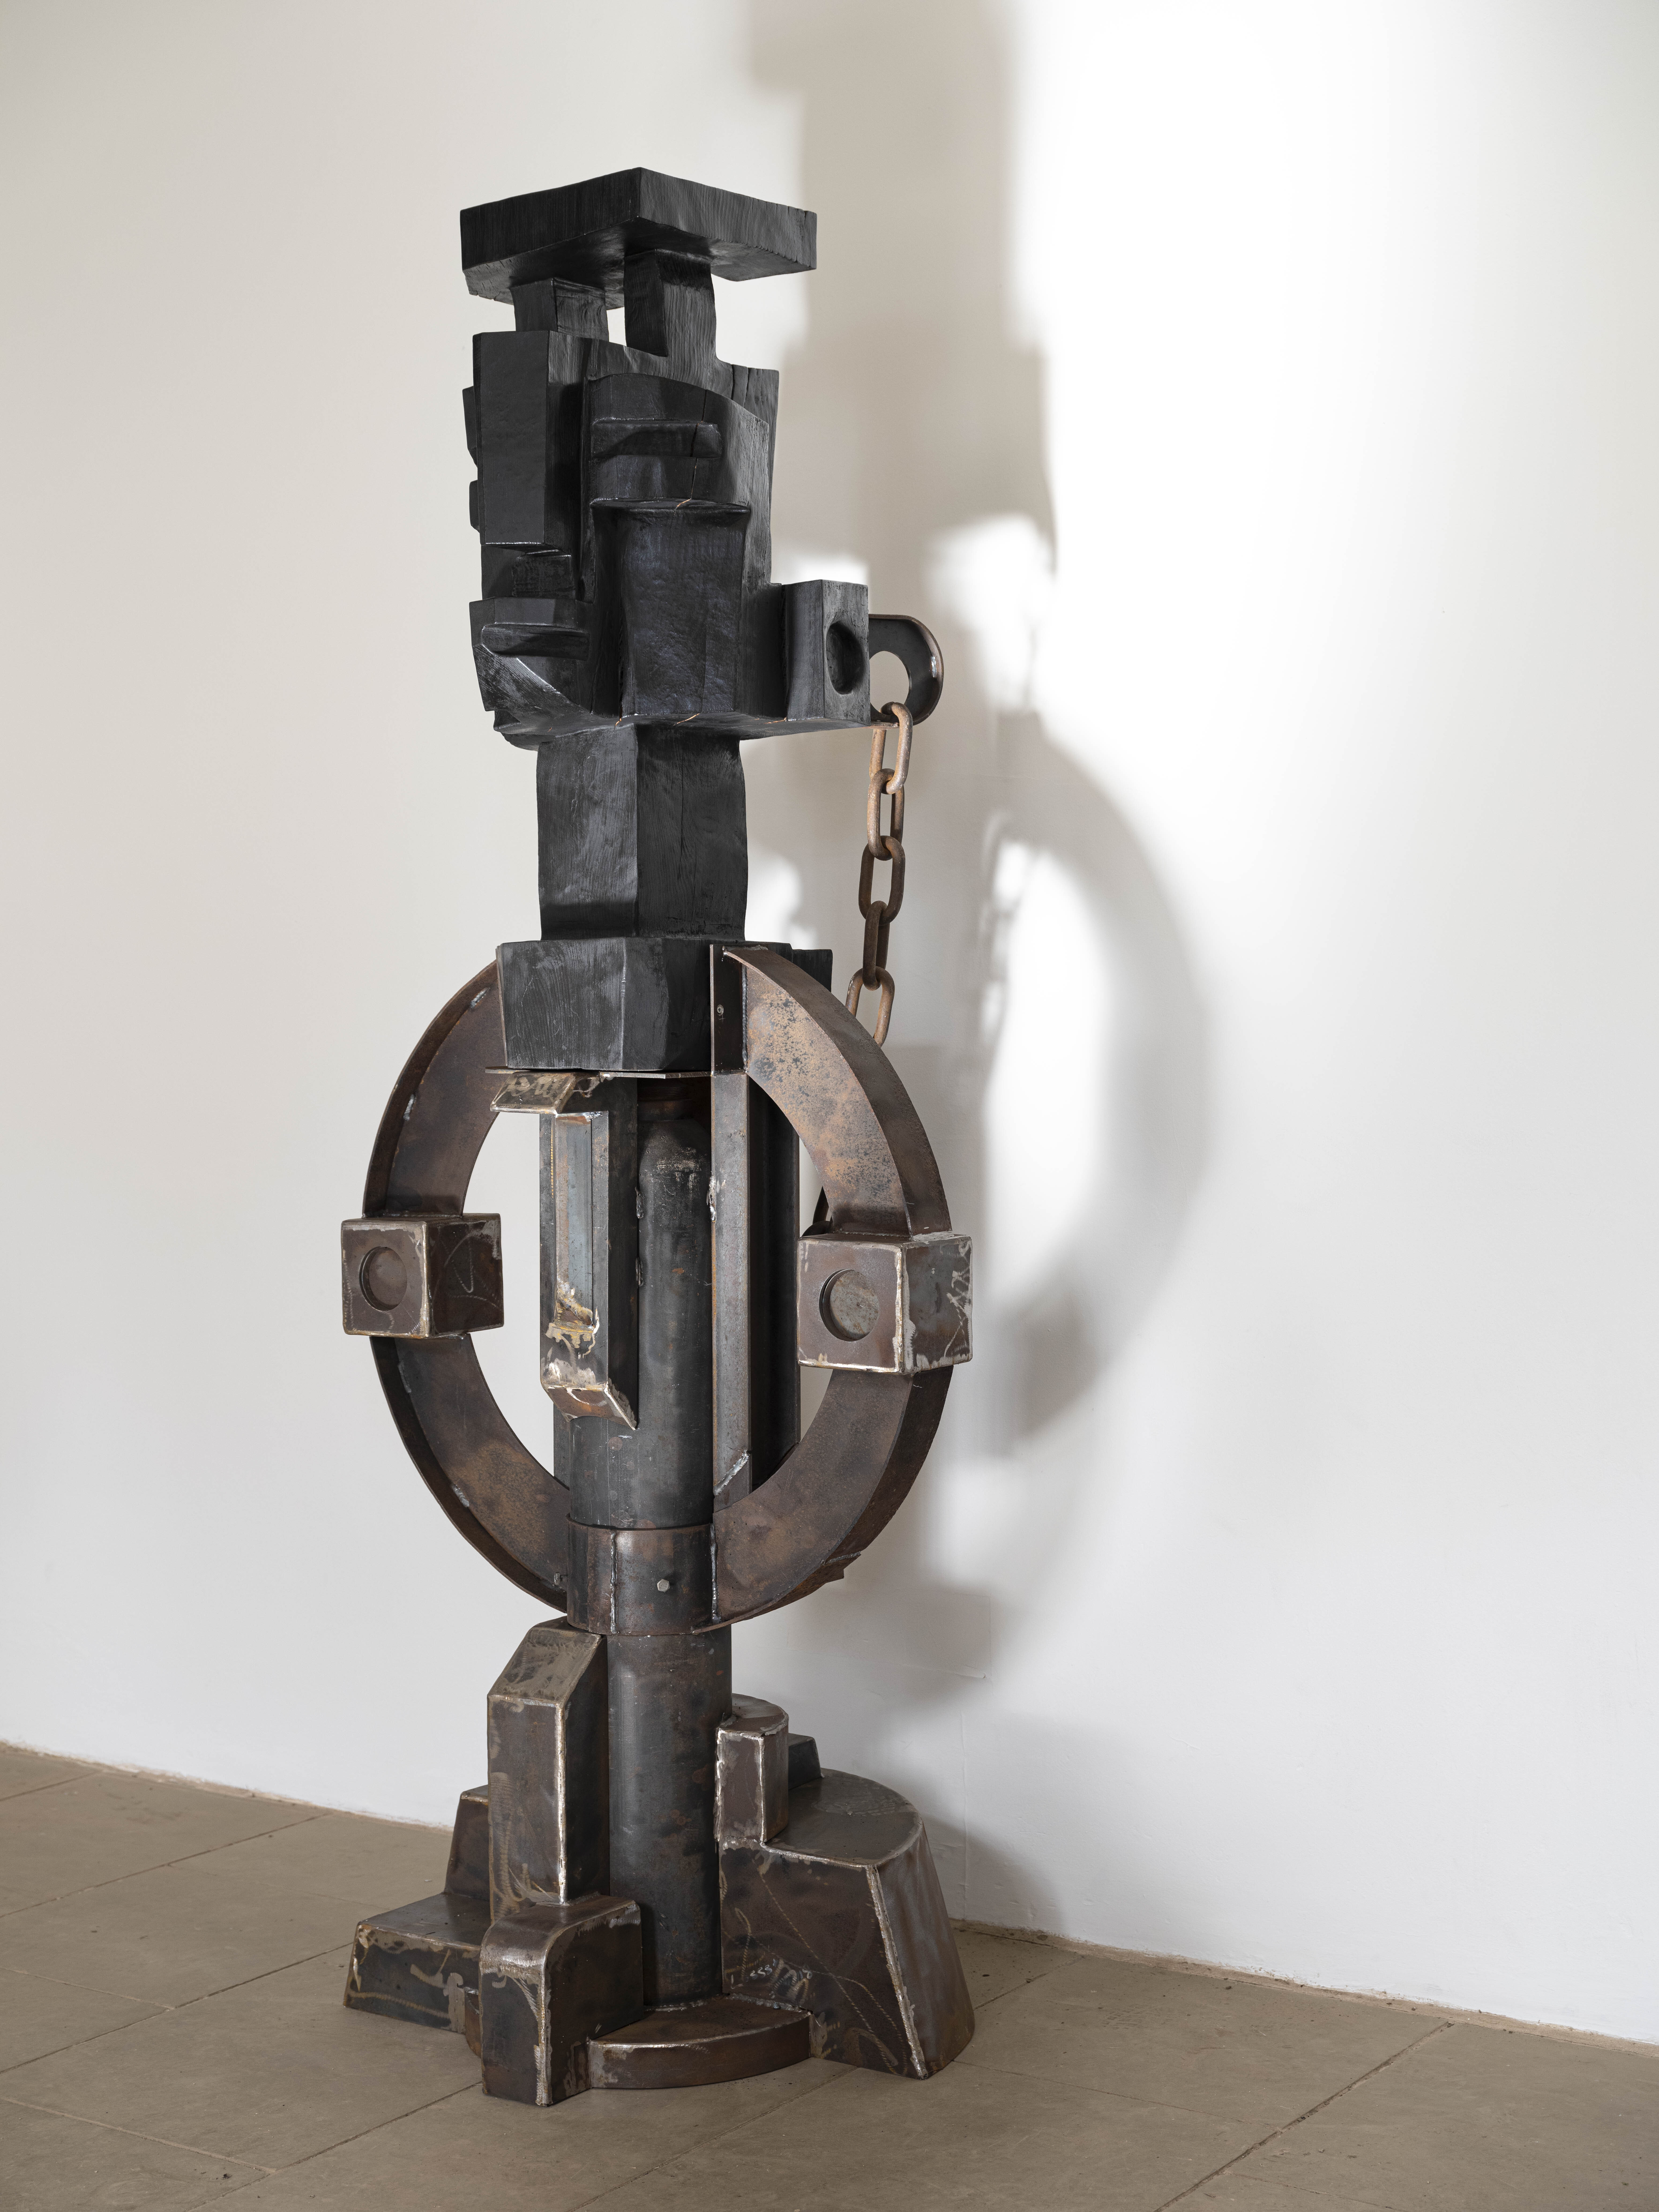 A carved wood and welded metal totem